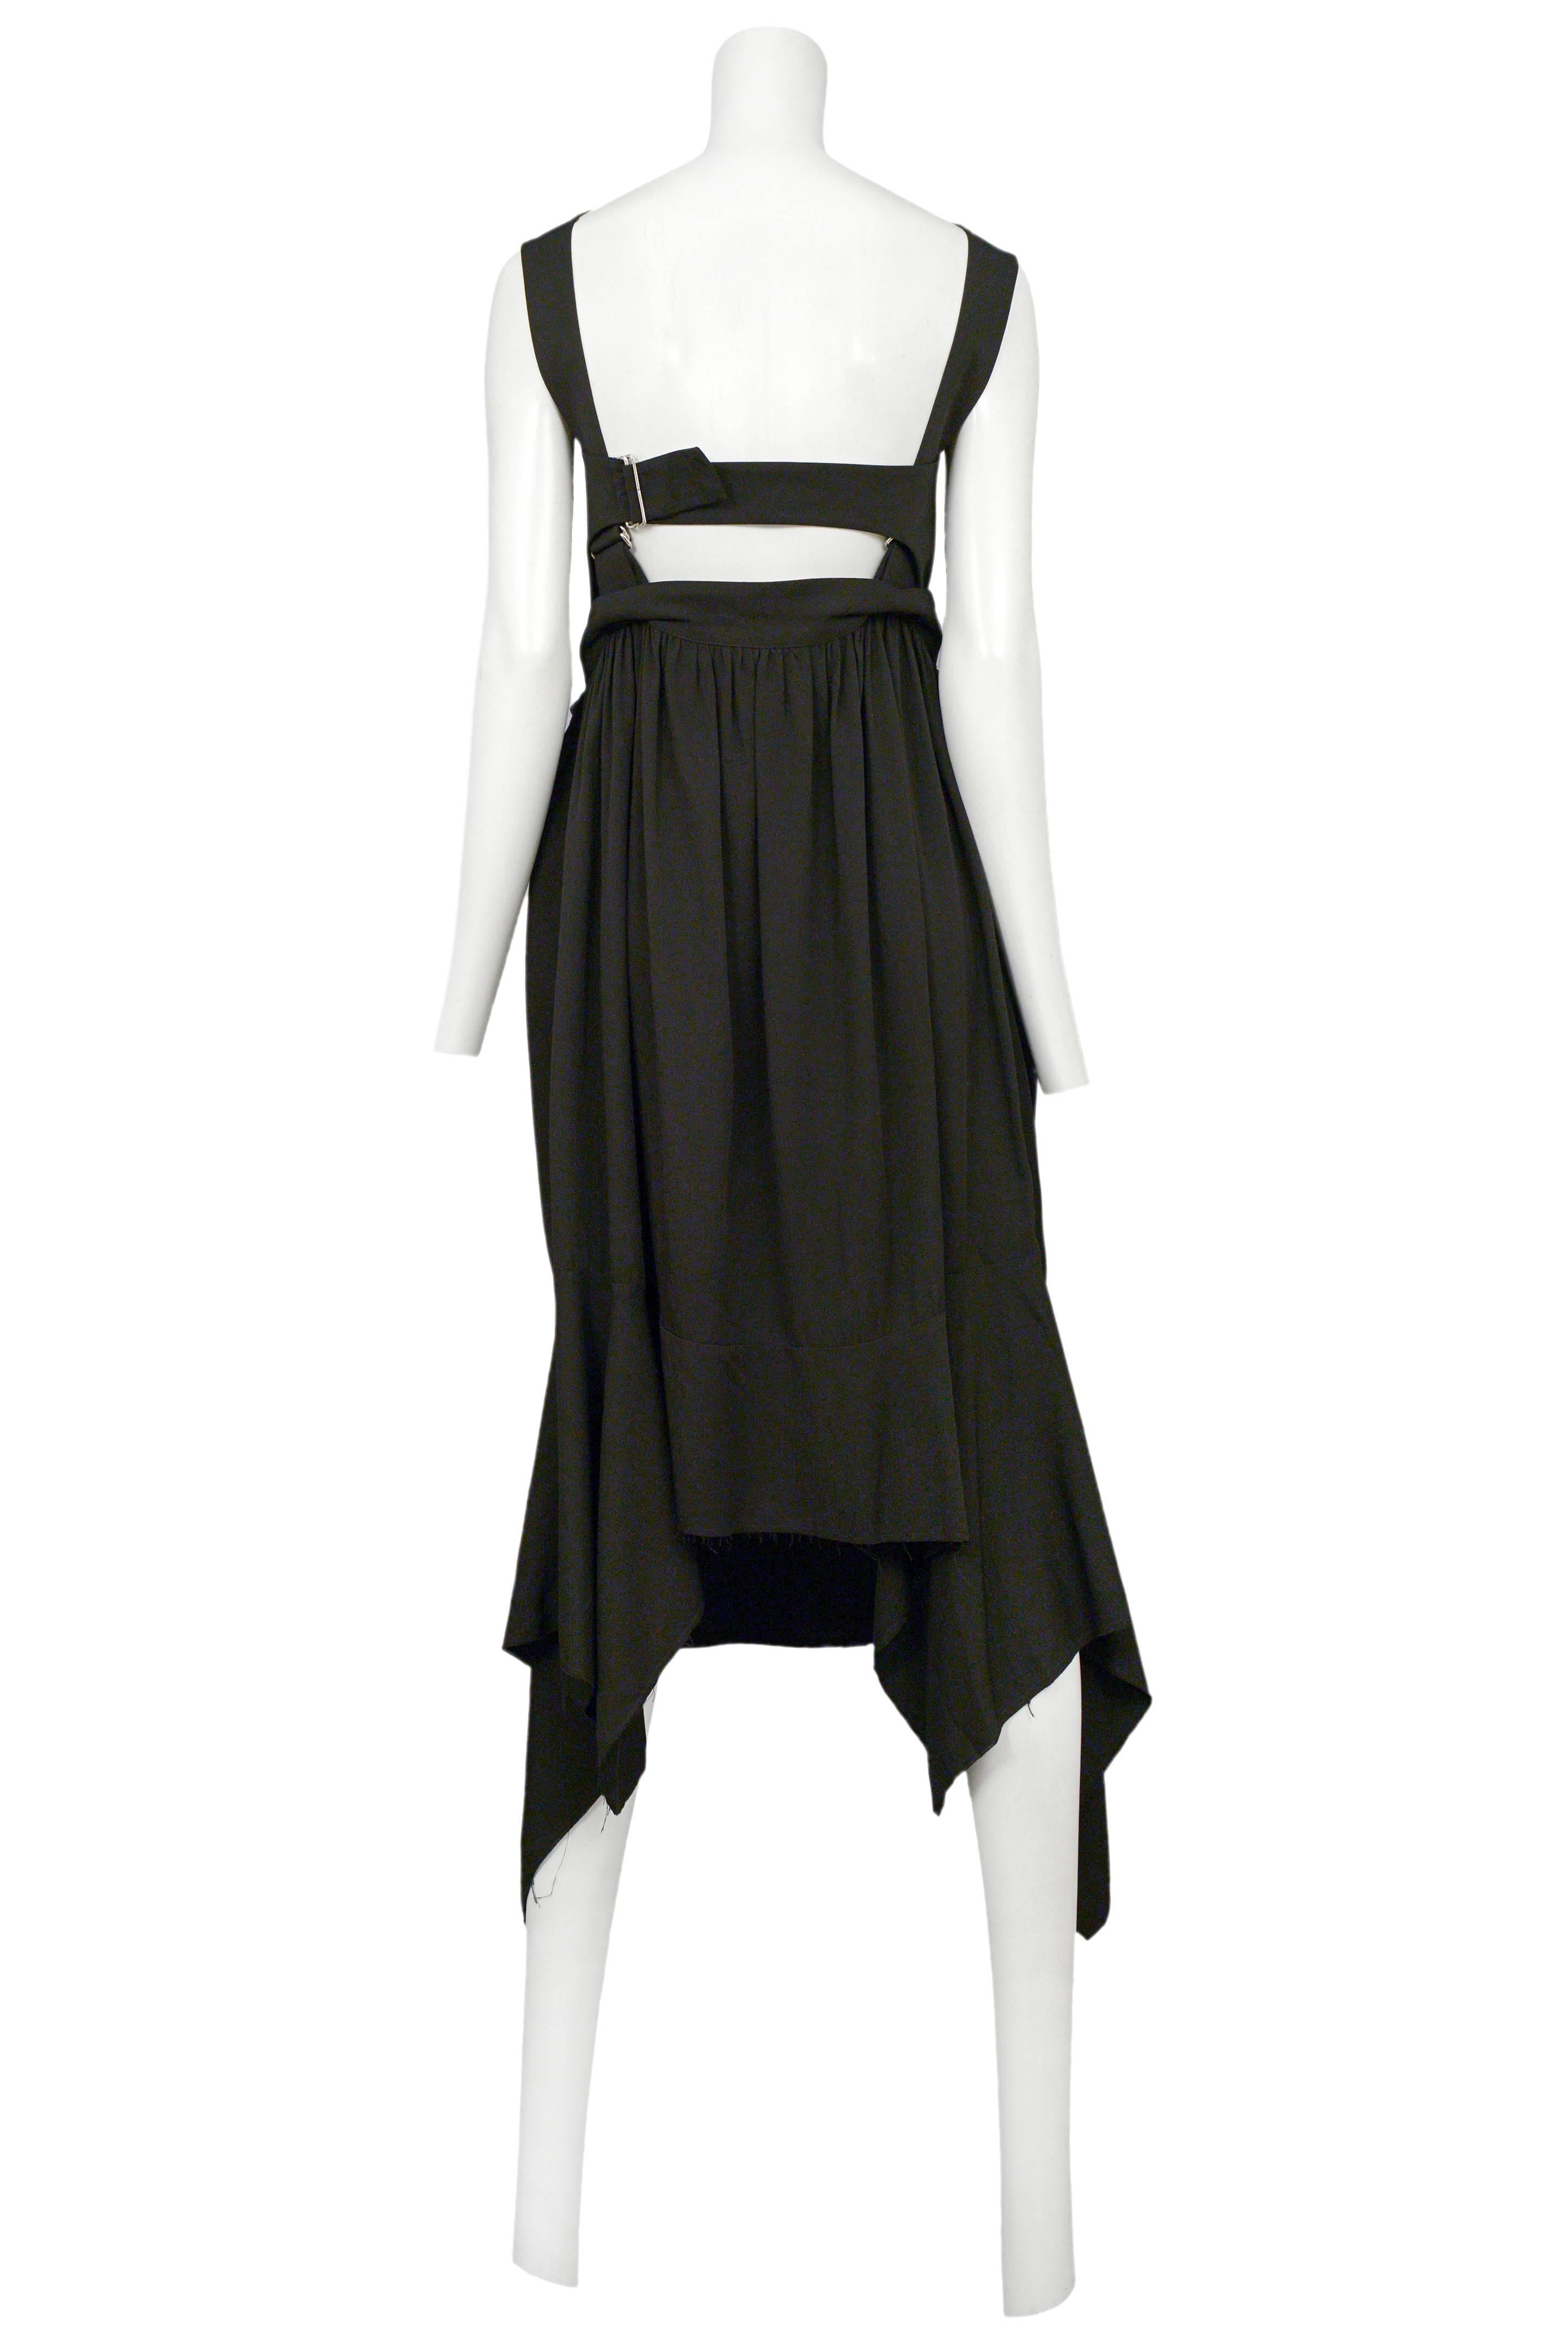 Yohji Yamamoto Black Backless Buckle Dress In Excellent Condition In Los Angeles, CA